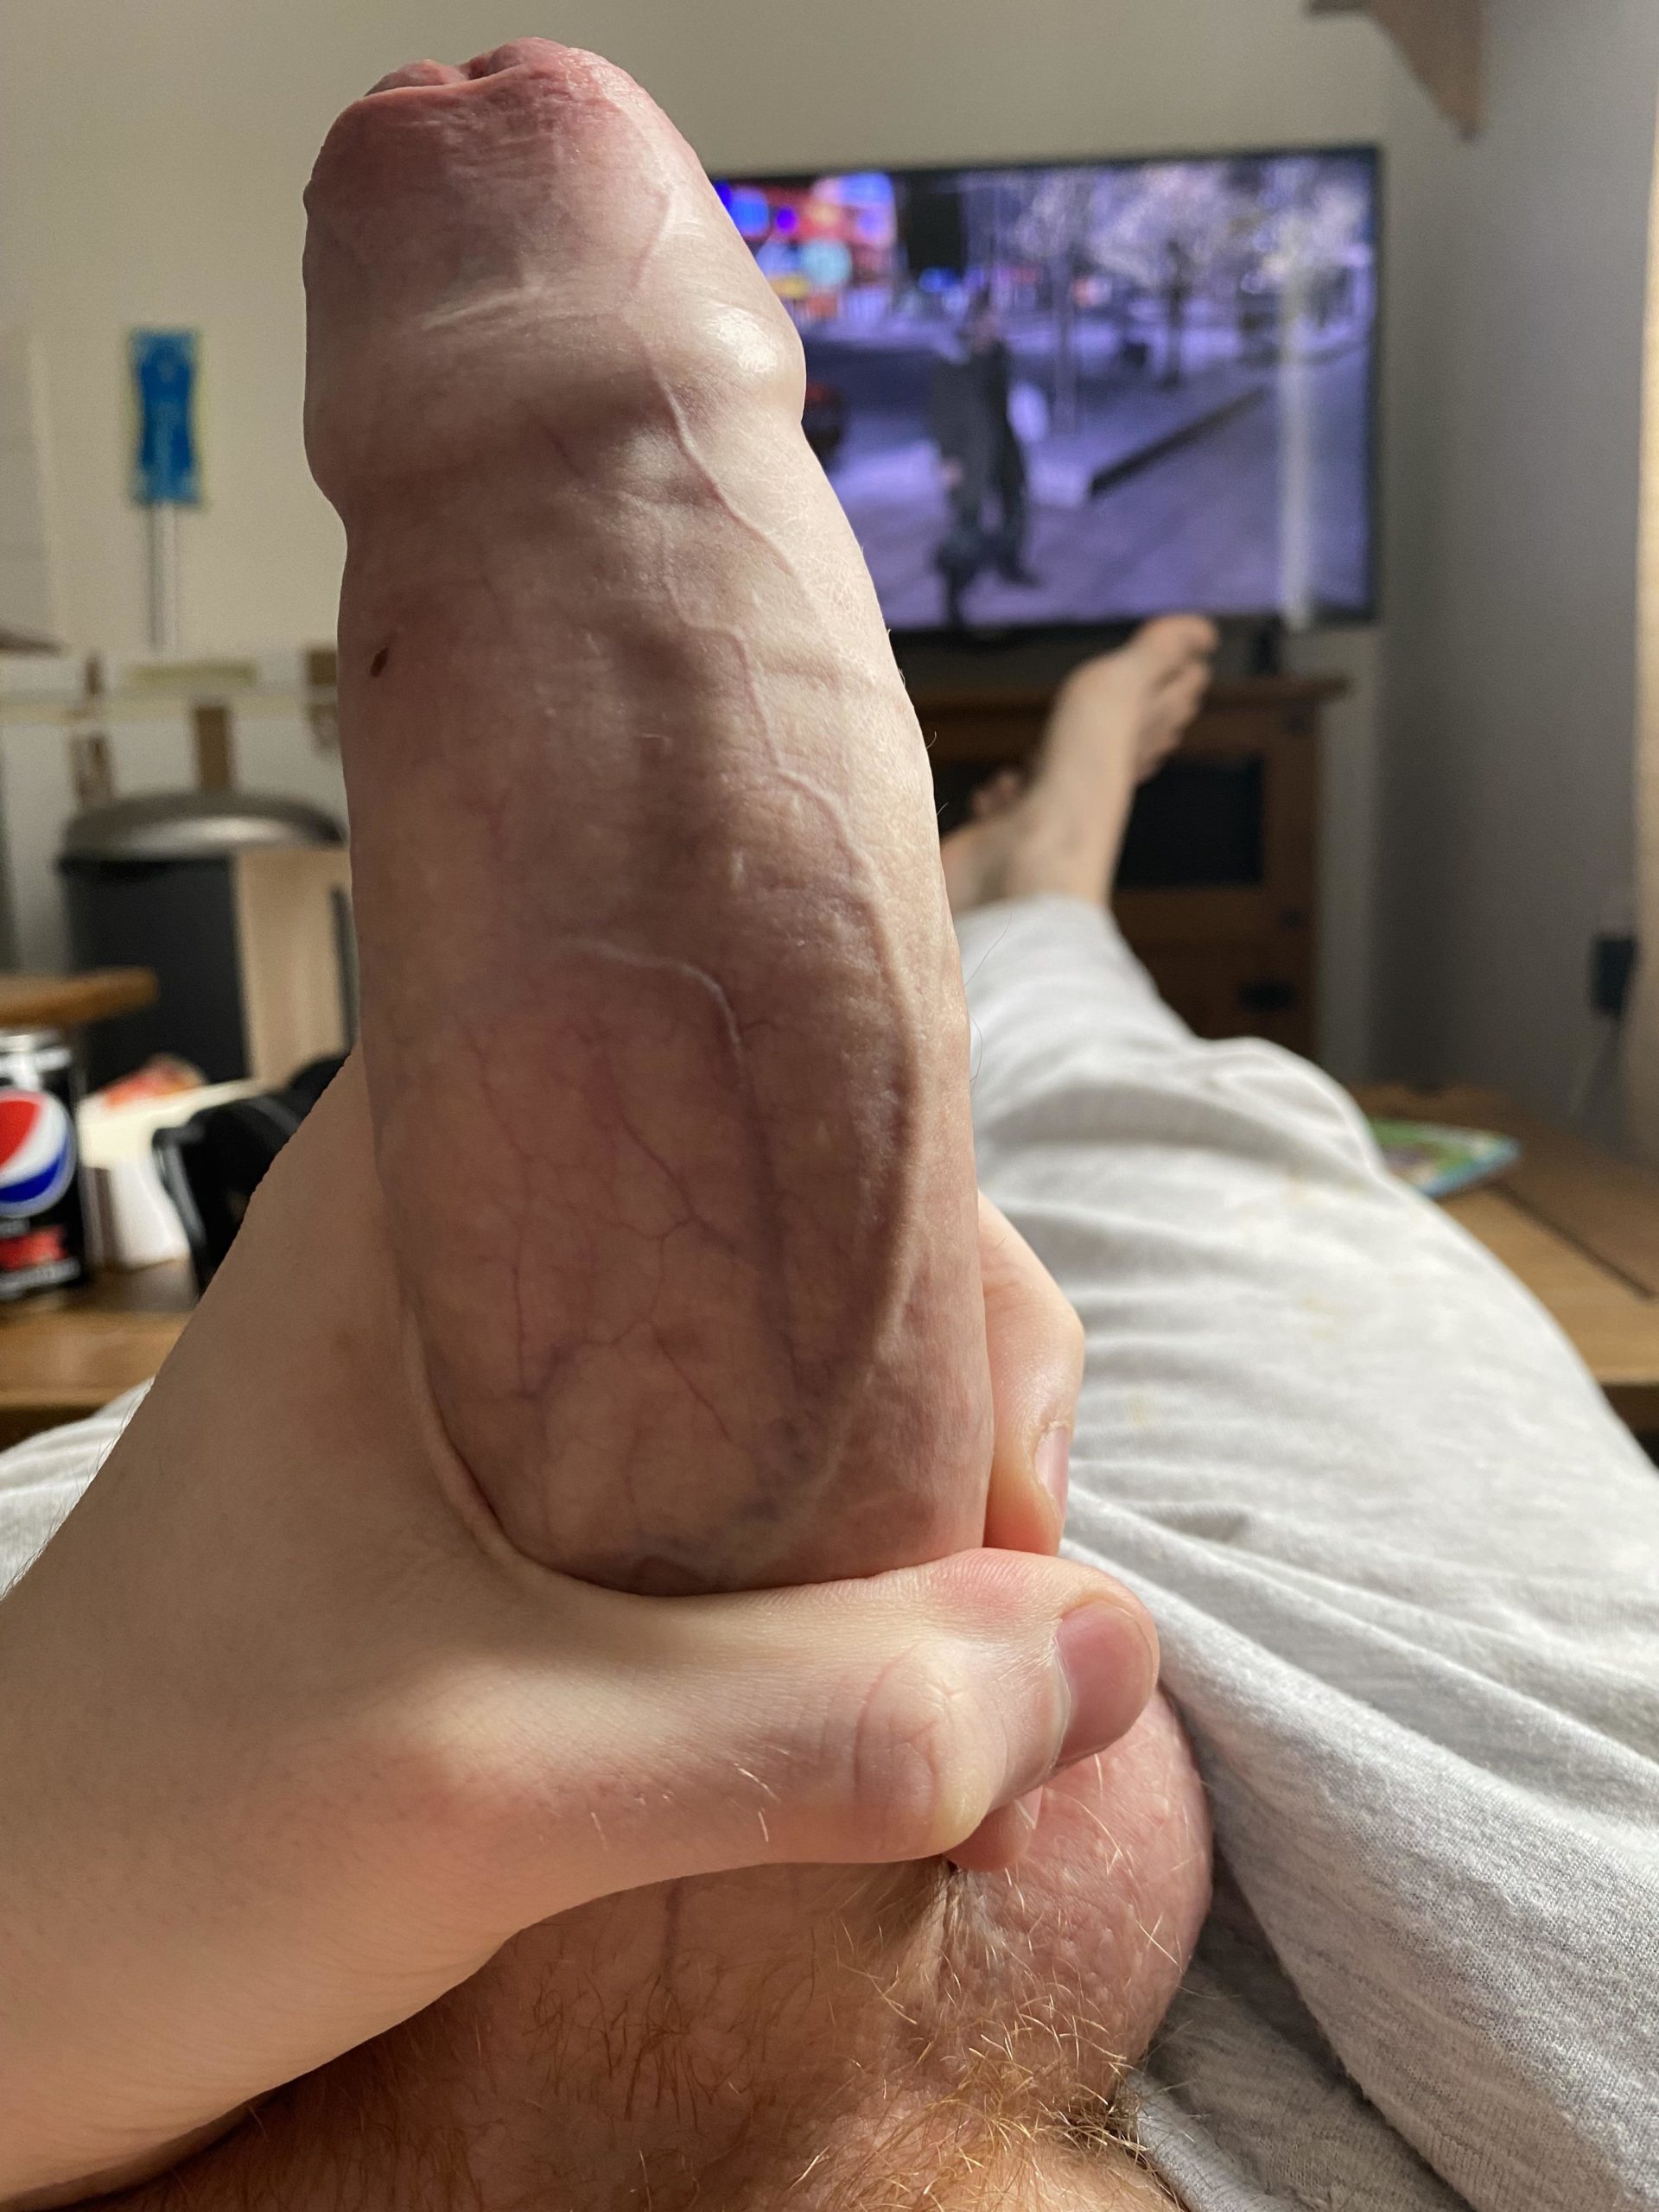 Bored and horny